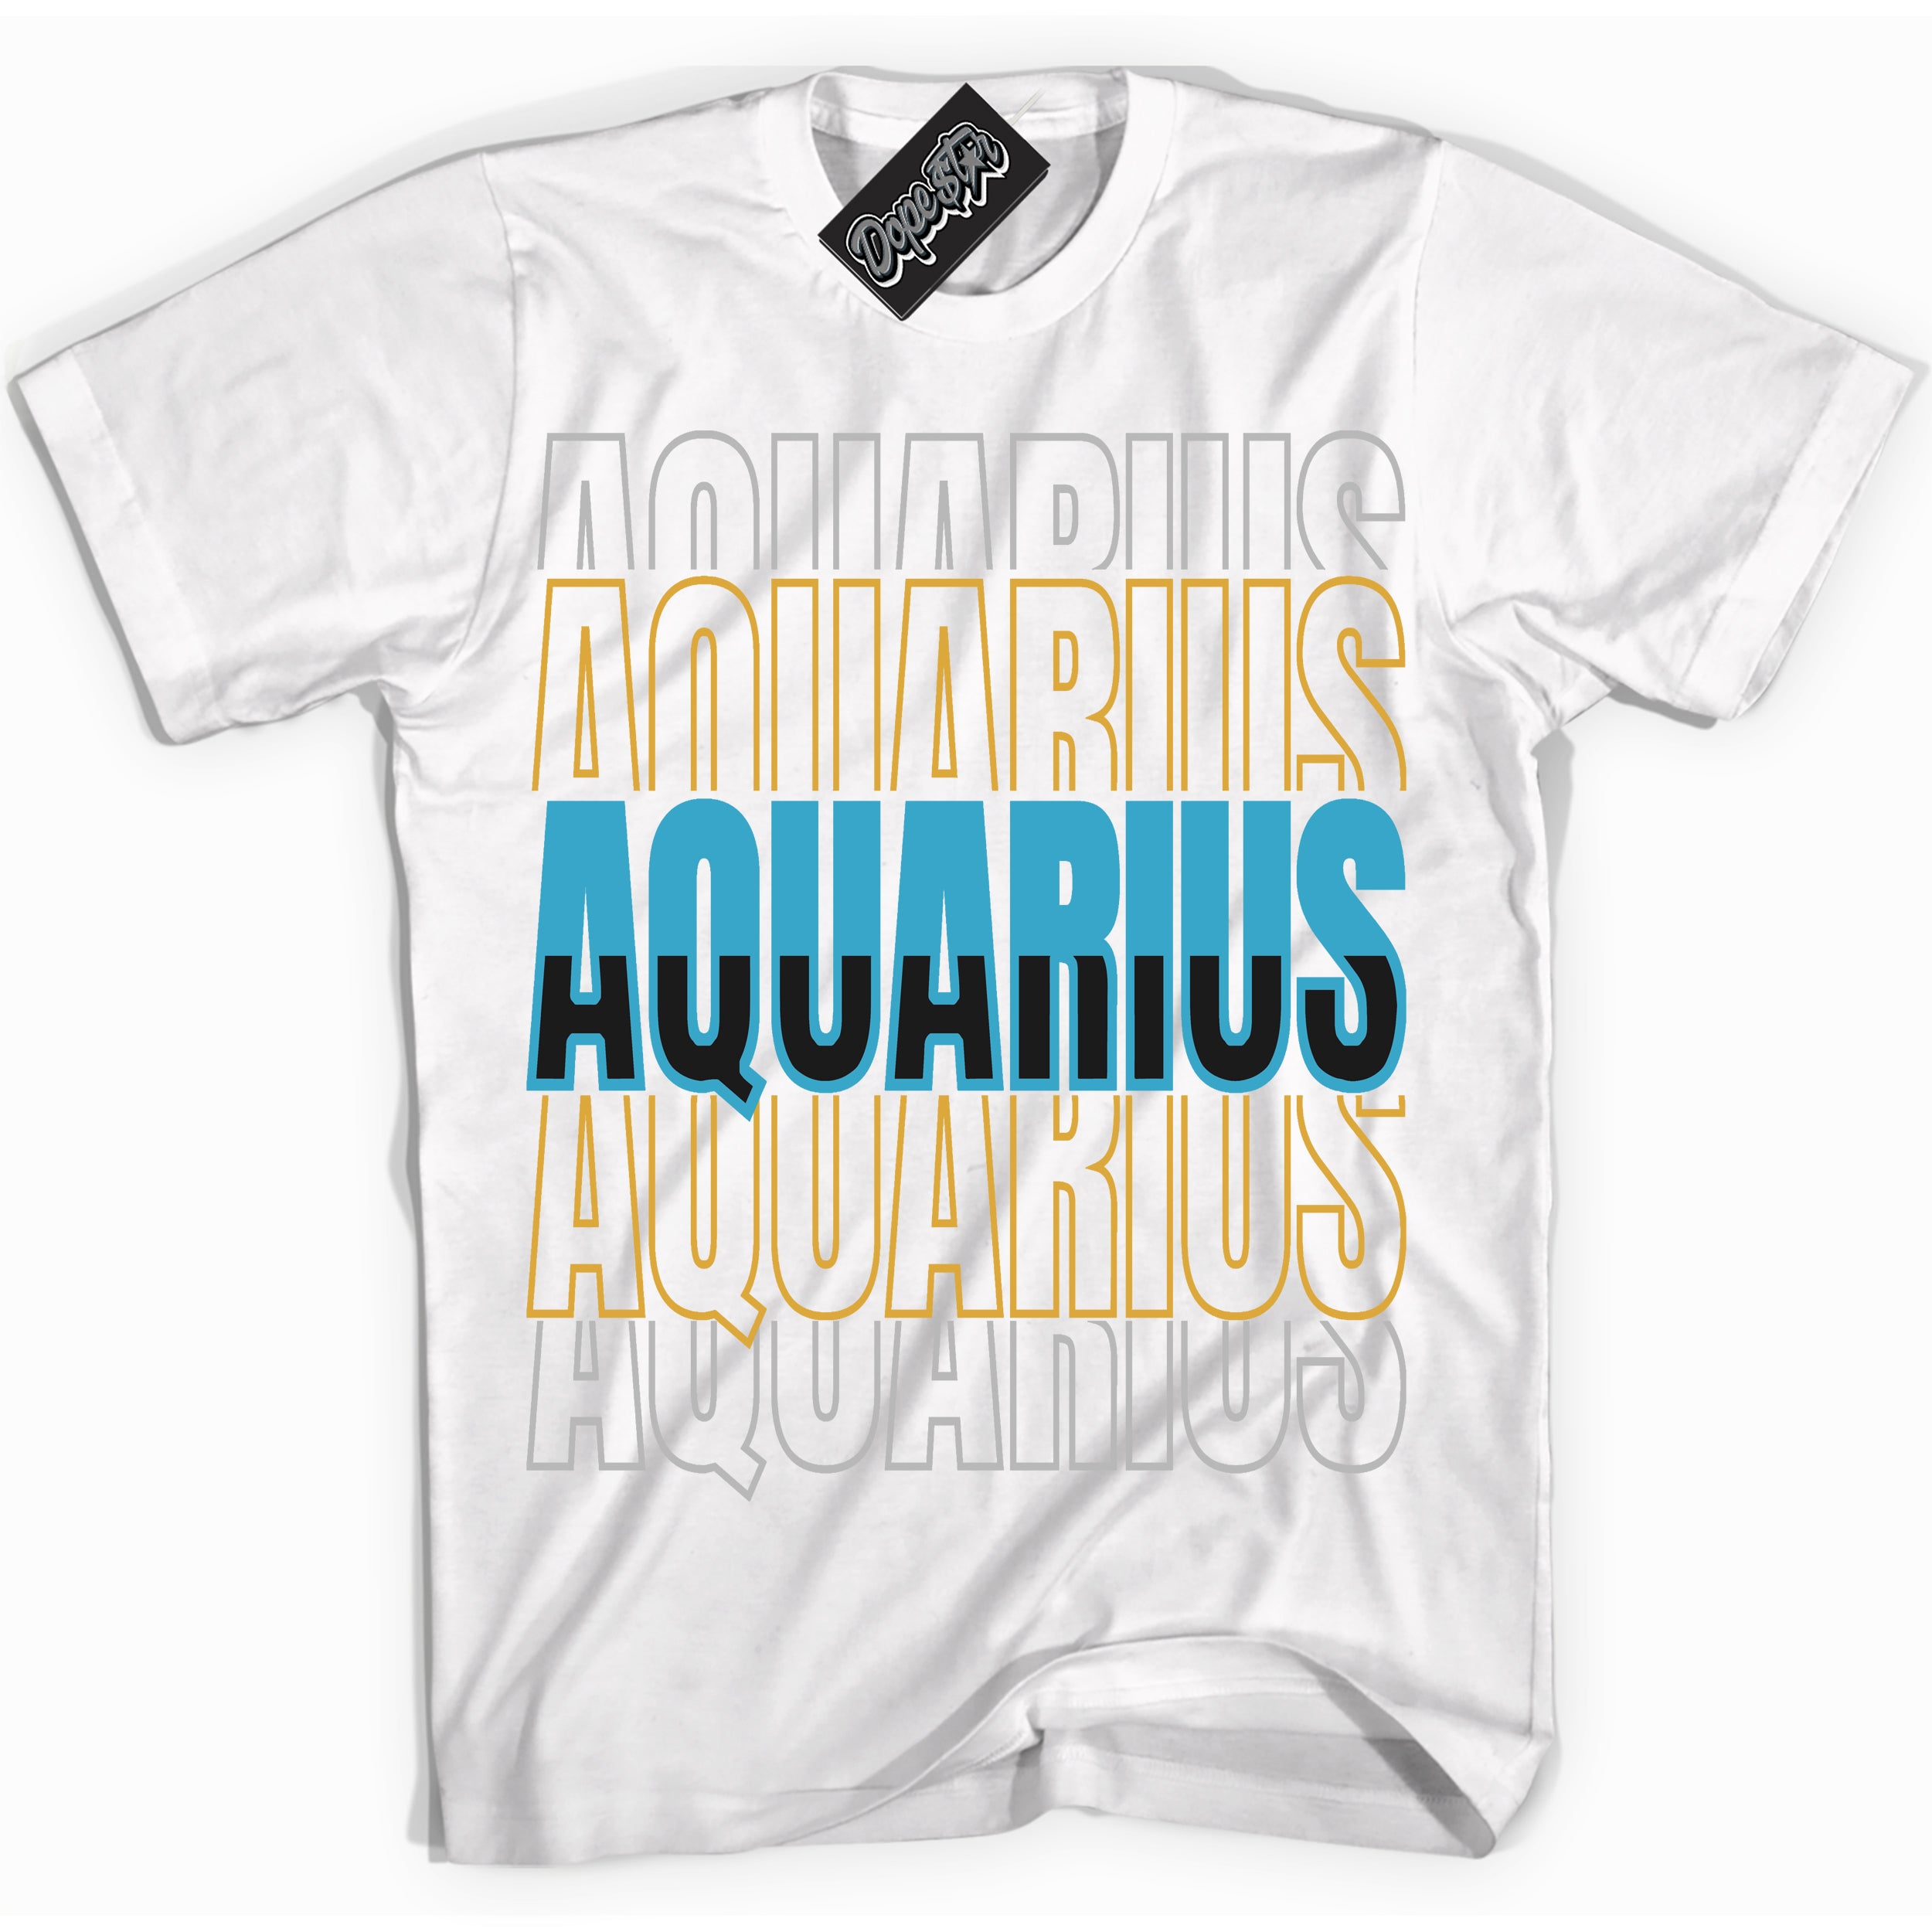 Cool White Shirt with “ Aquarius” design that perfectly matches Aqua 5s Sneakers.